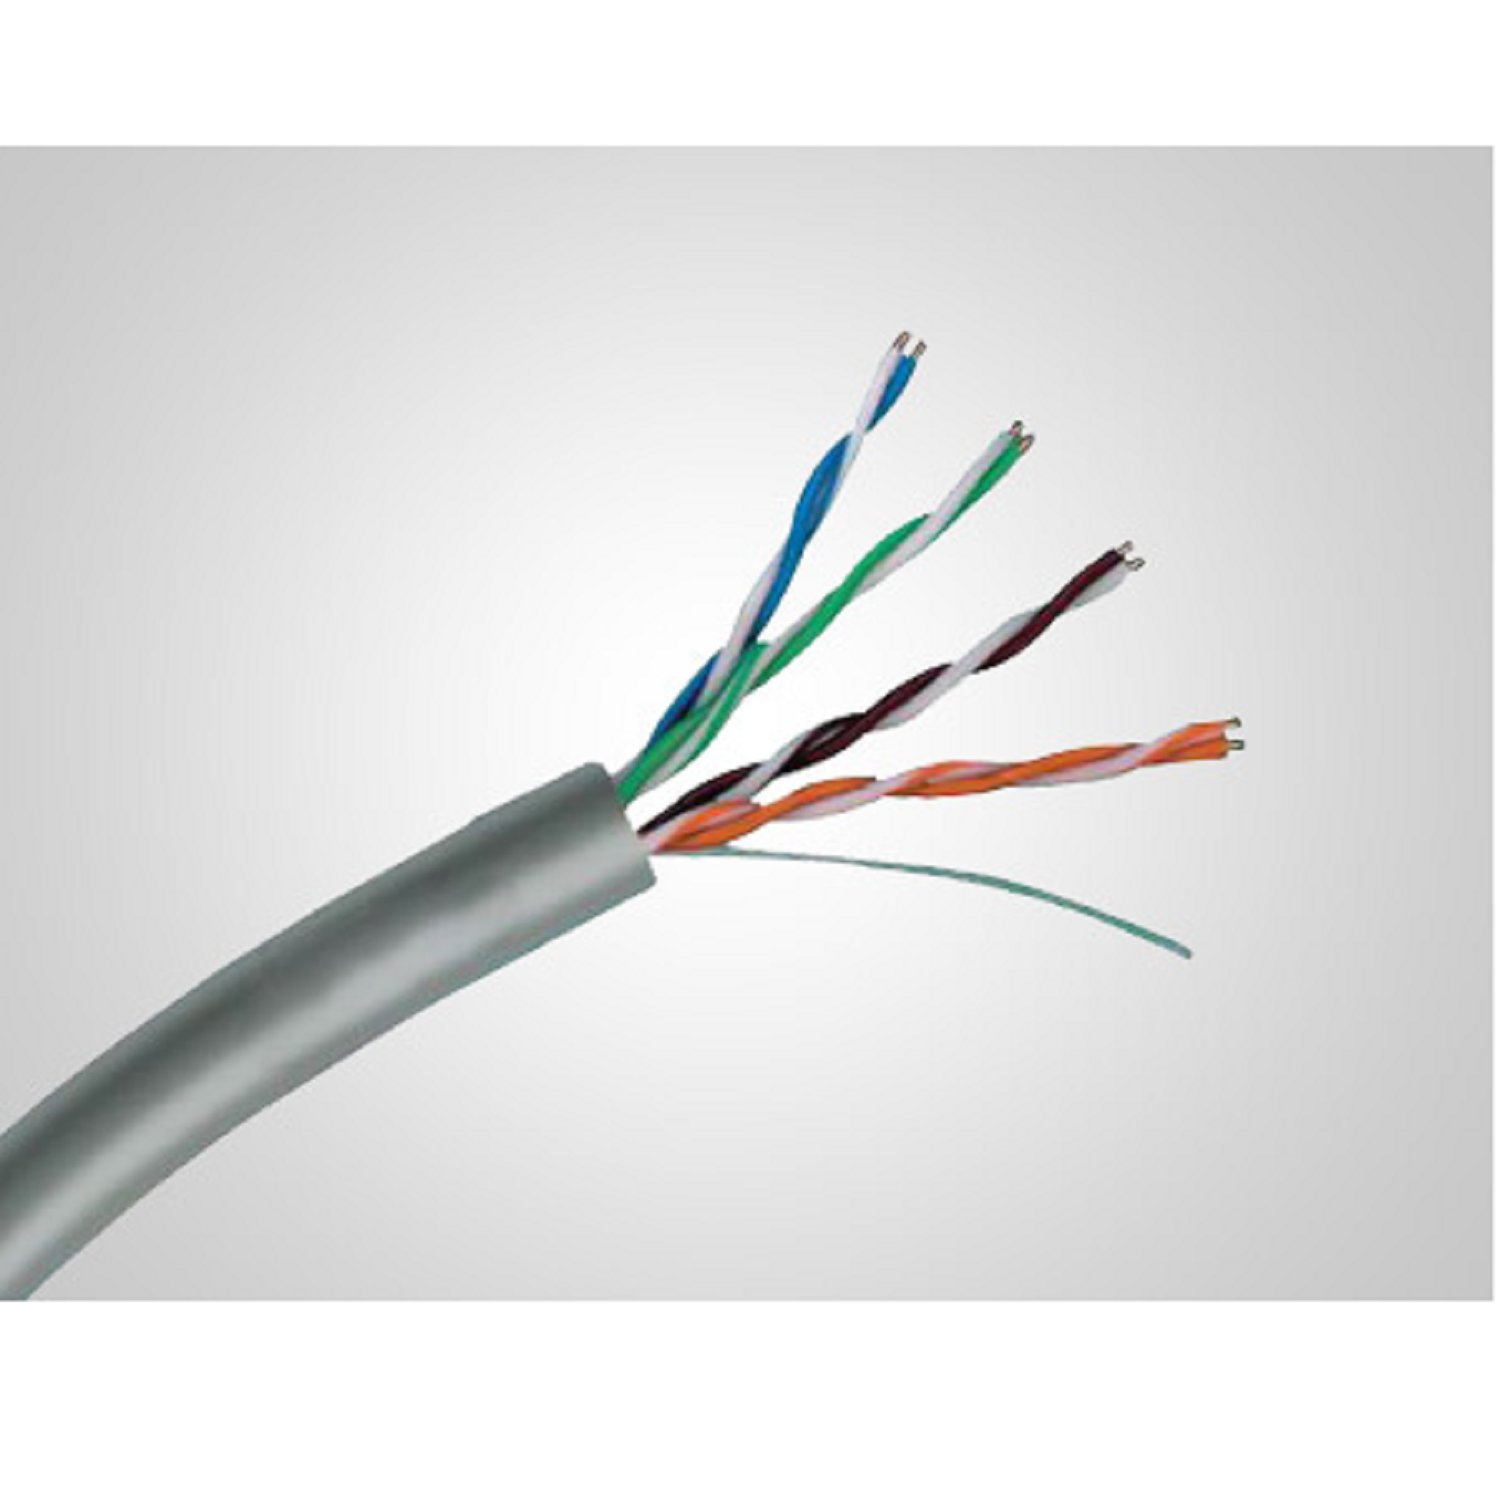 Teliphone Cable Polycab 0.4 (90 Meter)